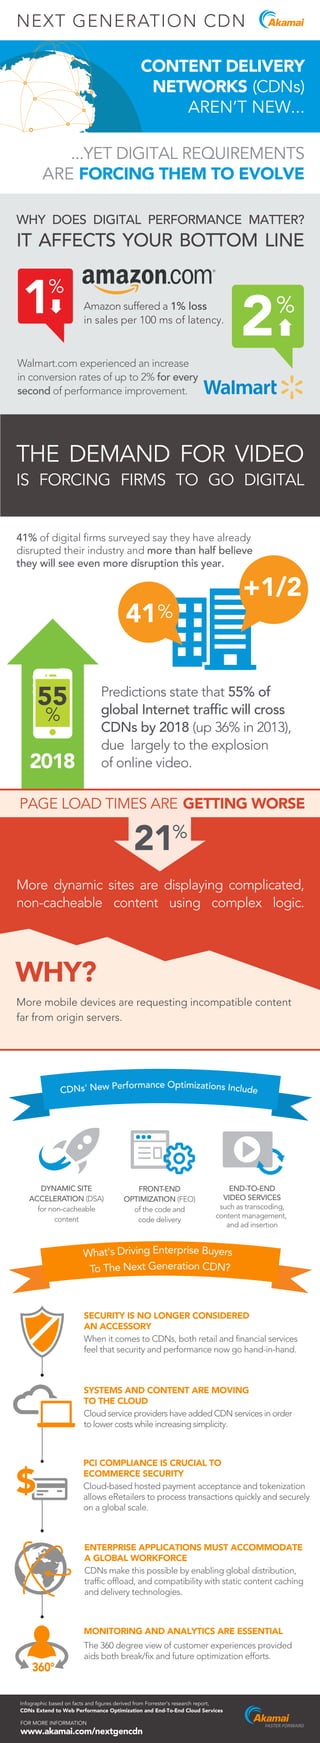 2018
55
%
21%
360°
+1/2
1%
2%
CONTENT DELIVERY
NETWORKS (CDNs)
AREN’T NEW...
...YET DIGITAL REQUIREMENTS
ARE FORCING THEM TO EVOLVE
PAGE LOAD TIMES ARE GETTING WORSE
FOR MORE INFORM
Infographic based on facts and figures derived from Forrester's research report,
CDNs Extend to Web Performance Optimization and End-To-End Cloud Services
ATION
www.akamai.com/nextgencdn
SECURITY IS NO LONGER CONSIDERED
AN ACCESSORY
When it comes to CDNs, both retail and financial services
feel that security and performance now go hand-in-hand.
DYNAMIC SITE
ACCELERATION (DSA)
for non-cacheable
content
FRONT-END
OPTIMIZATION (FEO)
of the code and
END-TO-END
VIDEO SERVICES
such as transcoding,
content management,
and ad insertion
code delivery
SYSTEMS AND CONTENT ARE MOVING
TO THE CLOUD
Cloud service providers have added CDN services in order
to lower costs while increasing simplicity.
PCI COMPLIANCE IS CRUCIAL TO
ECOMMERCE SECURITY
Cloud-based hosted payment acceptance and tokenization
allows eRetailers to process transactions quickly and securely
on a global scale.
ENTERPRISE APPLICATIONS MUST ACCOMMODATE
A GLOBAL WORKFORCE
CDNs make this possible by enabling global distribution,
traffic offload, and compatibility with static content caching
and delivery technologies.
MONITORING AND ANALYTICS ARE ESSENTIAL
The 360 degree view of customer experiences provided
aids both break/fix and future optimization efforts.
WHY?
More dynamic sites are displaying complicated,
non-cacheable content using complex logic.
THE DEMAND FOR VIDEO
IS FORCING FIRMS TO GO DIGITAL
WHY DOES DIGITAL PERFORMANCE MATTER?
IT AFFECTS YOUR BOTTOM LINE
More mobile devices are requesting incompatible content
far from origin servers.
Walmart.com experienced an increase
in conversion rates of up to 2% for every
second of performance improvement.
Amazon suffered a 1% loss
in sales per 100 ms of latency.
Predictions state that 55% of
global Internet traffic will cross
CDNs by 2018 (up 36% in 2013),
due largely to the explosion
of online video.
41% of digital firms surveyed say they have already
disrupted their industry and more than half believe
they will see even more disruption this year.
41%
NEXT GENERATION CDN
CDNs' New Performance Optimizations Include
What's Driving Enterprise Buyers
To The Next Generation CDN?
 